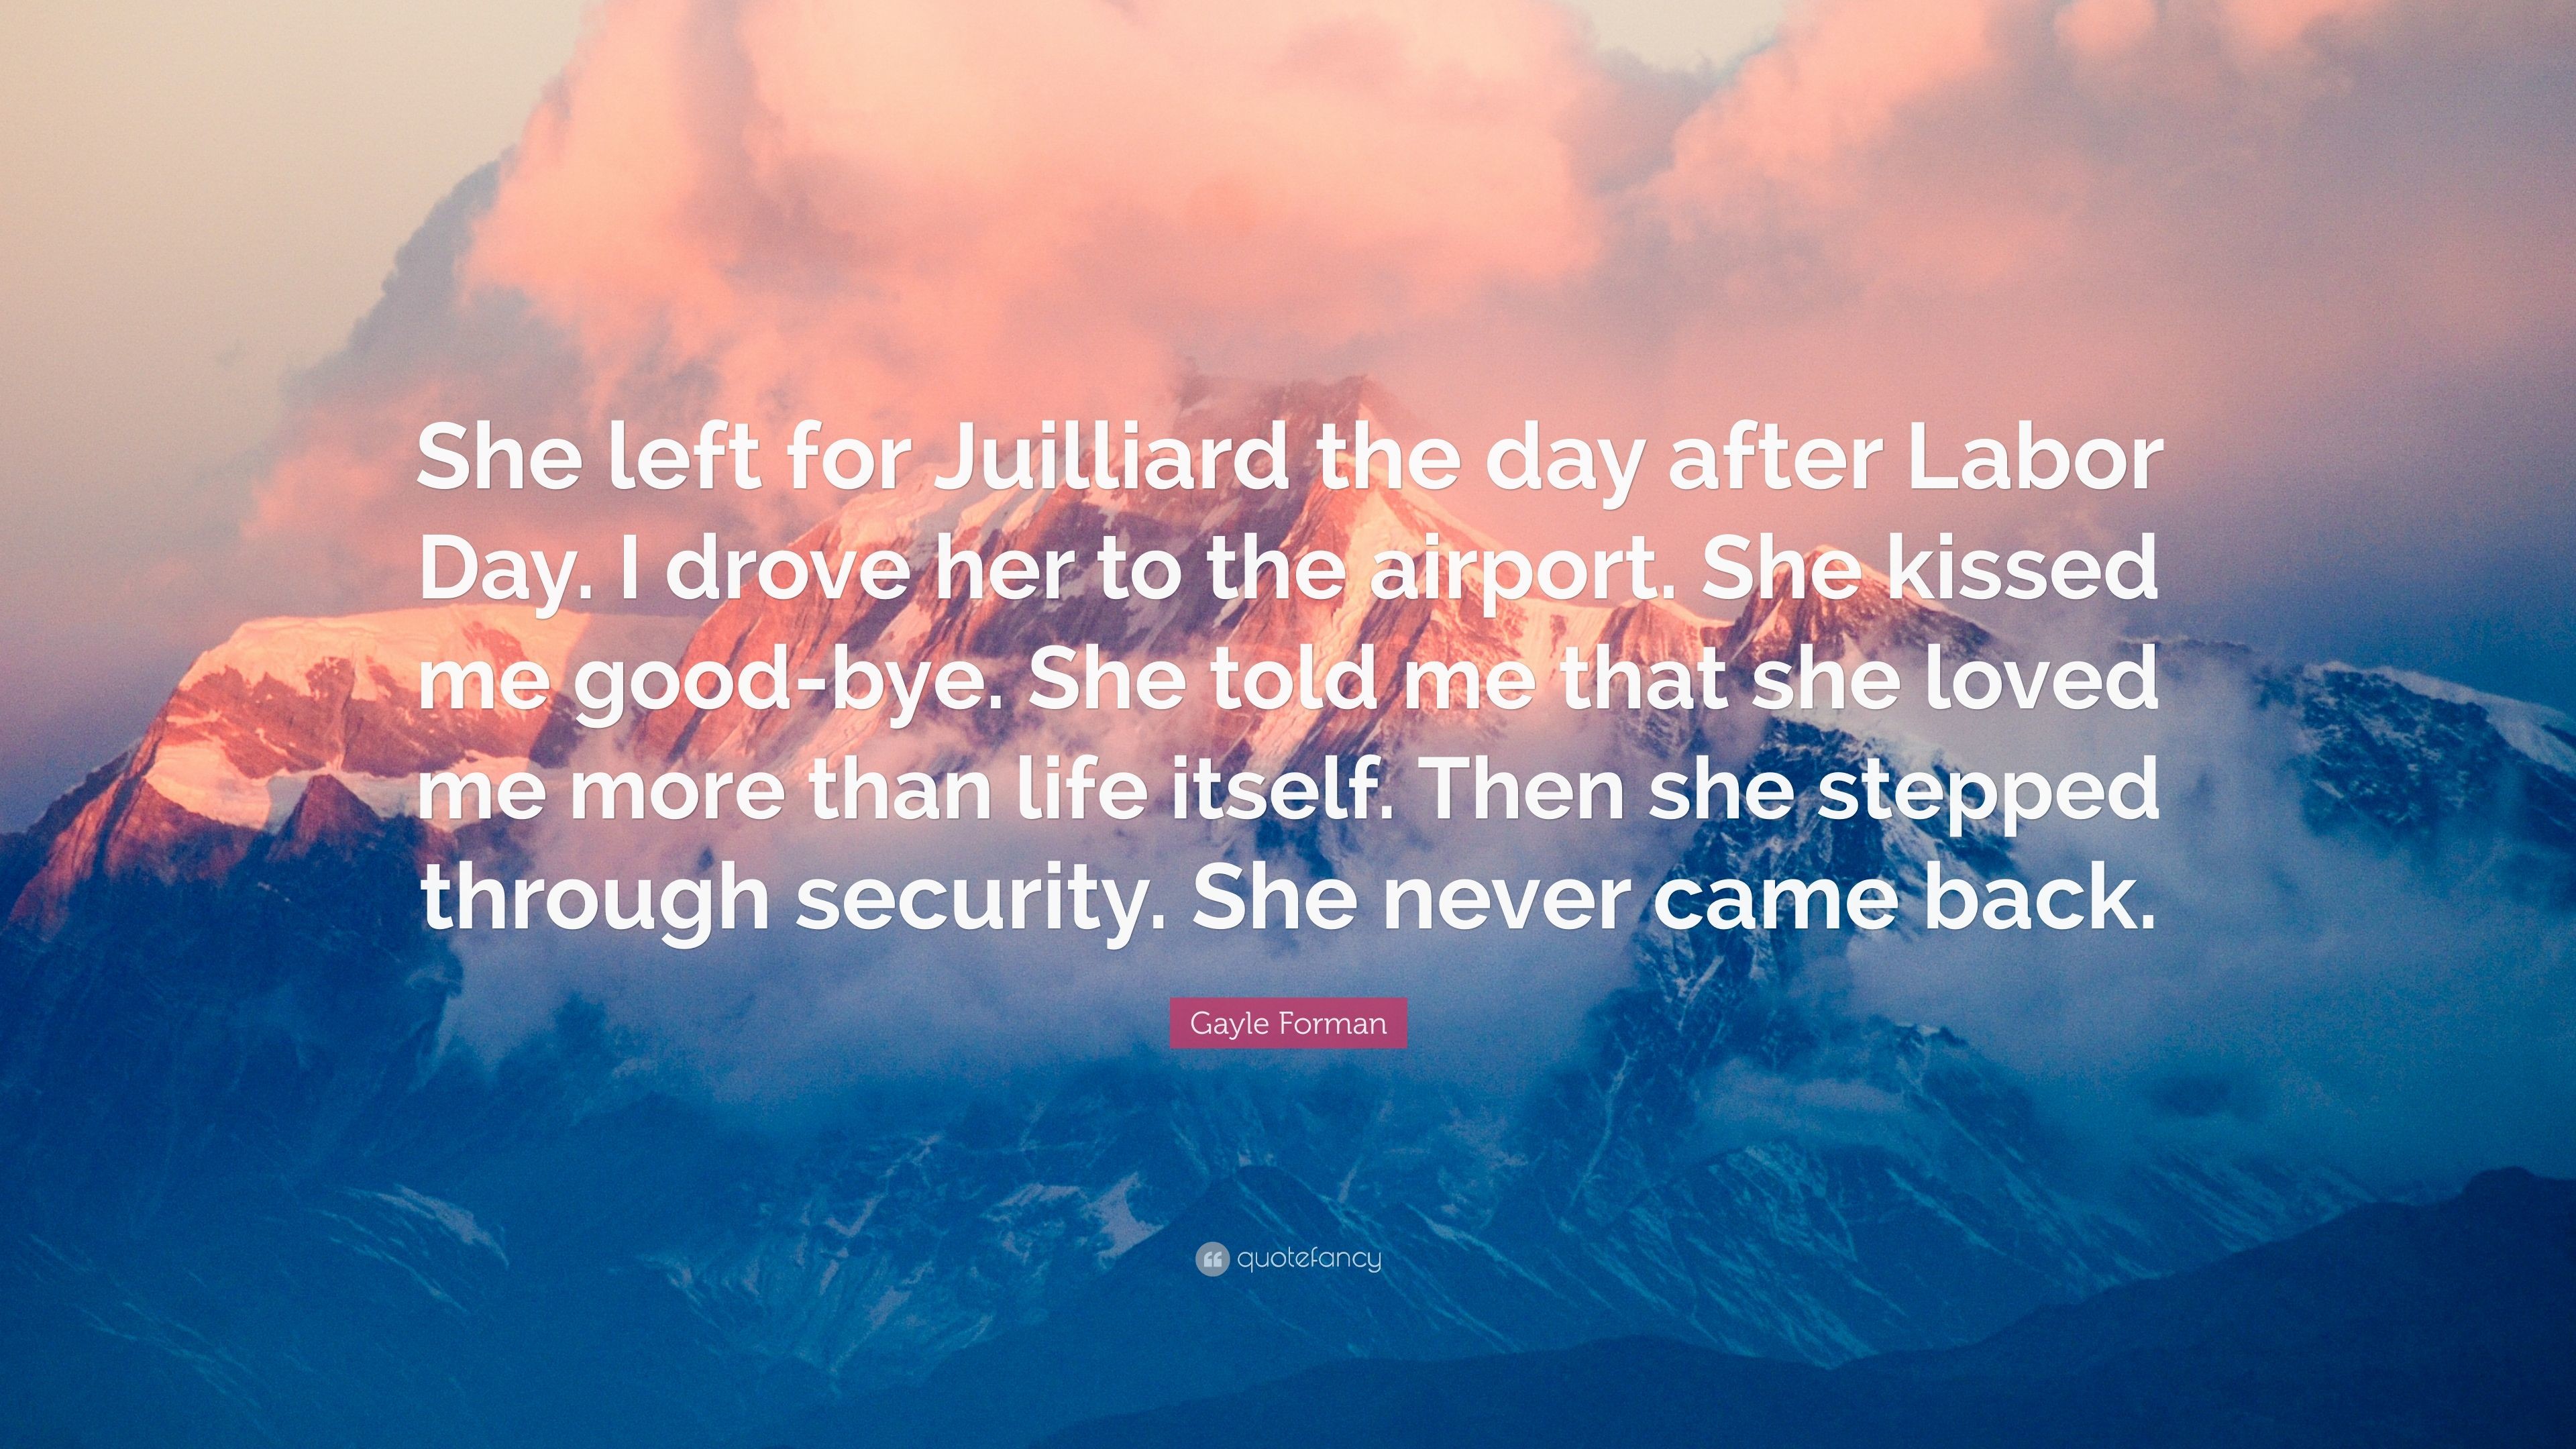 3840x2160 Gayle Forman Quote: “She left for Juilliard the day after Labor Day. I